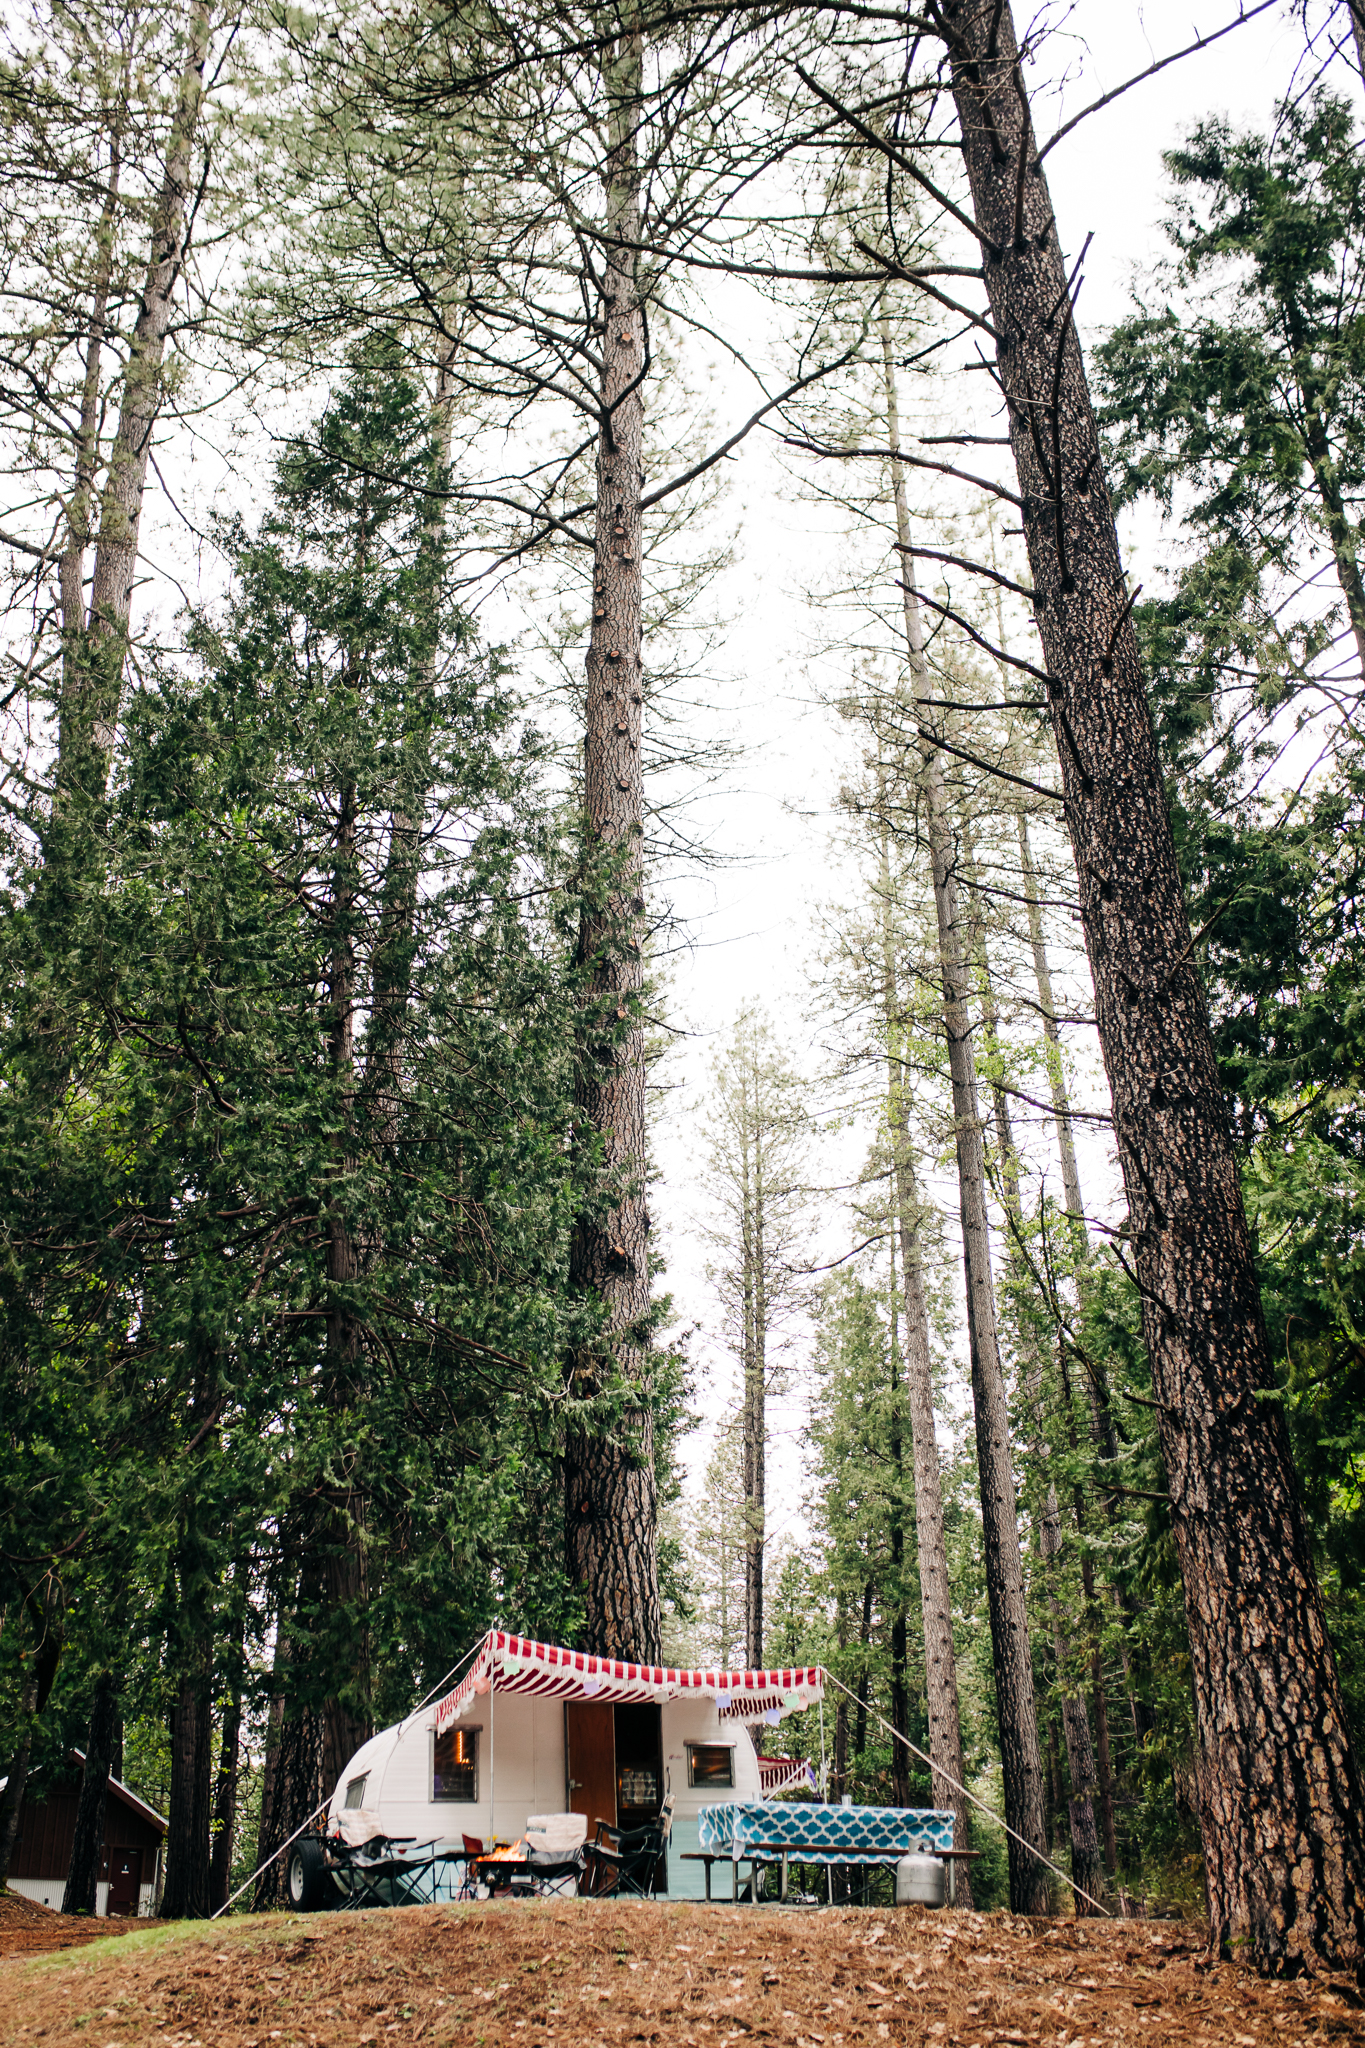 PhotoWalk at the Inn Town Campground with Nevada City Scenics | 